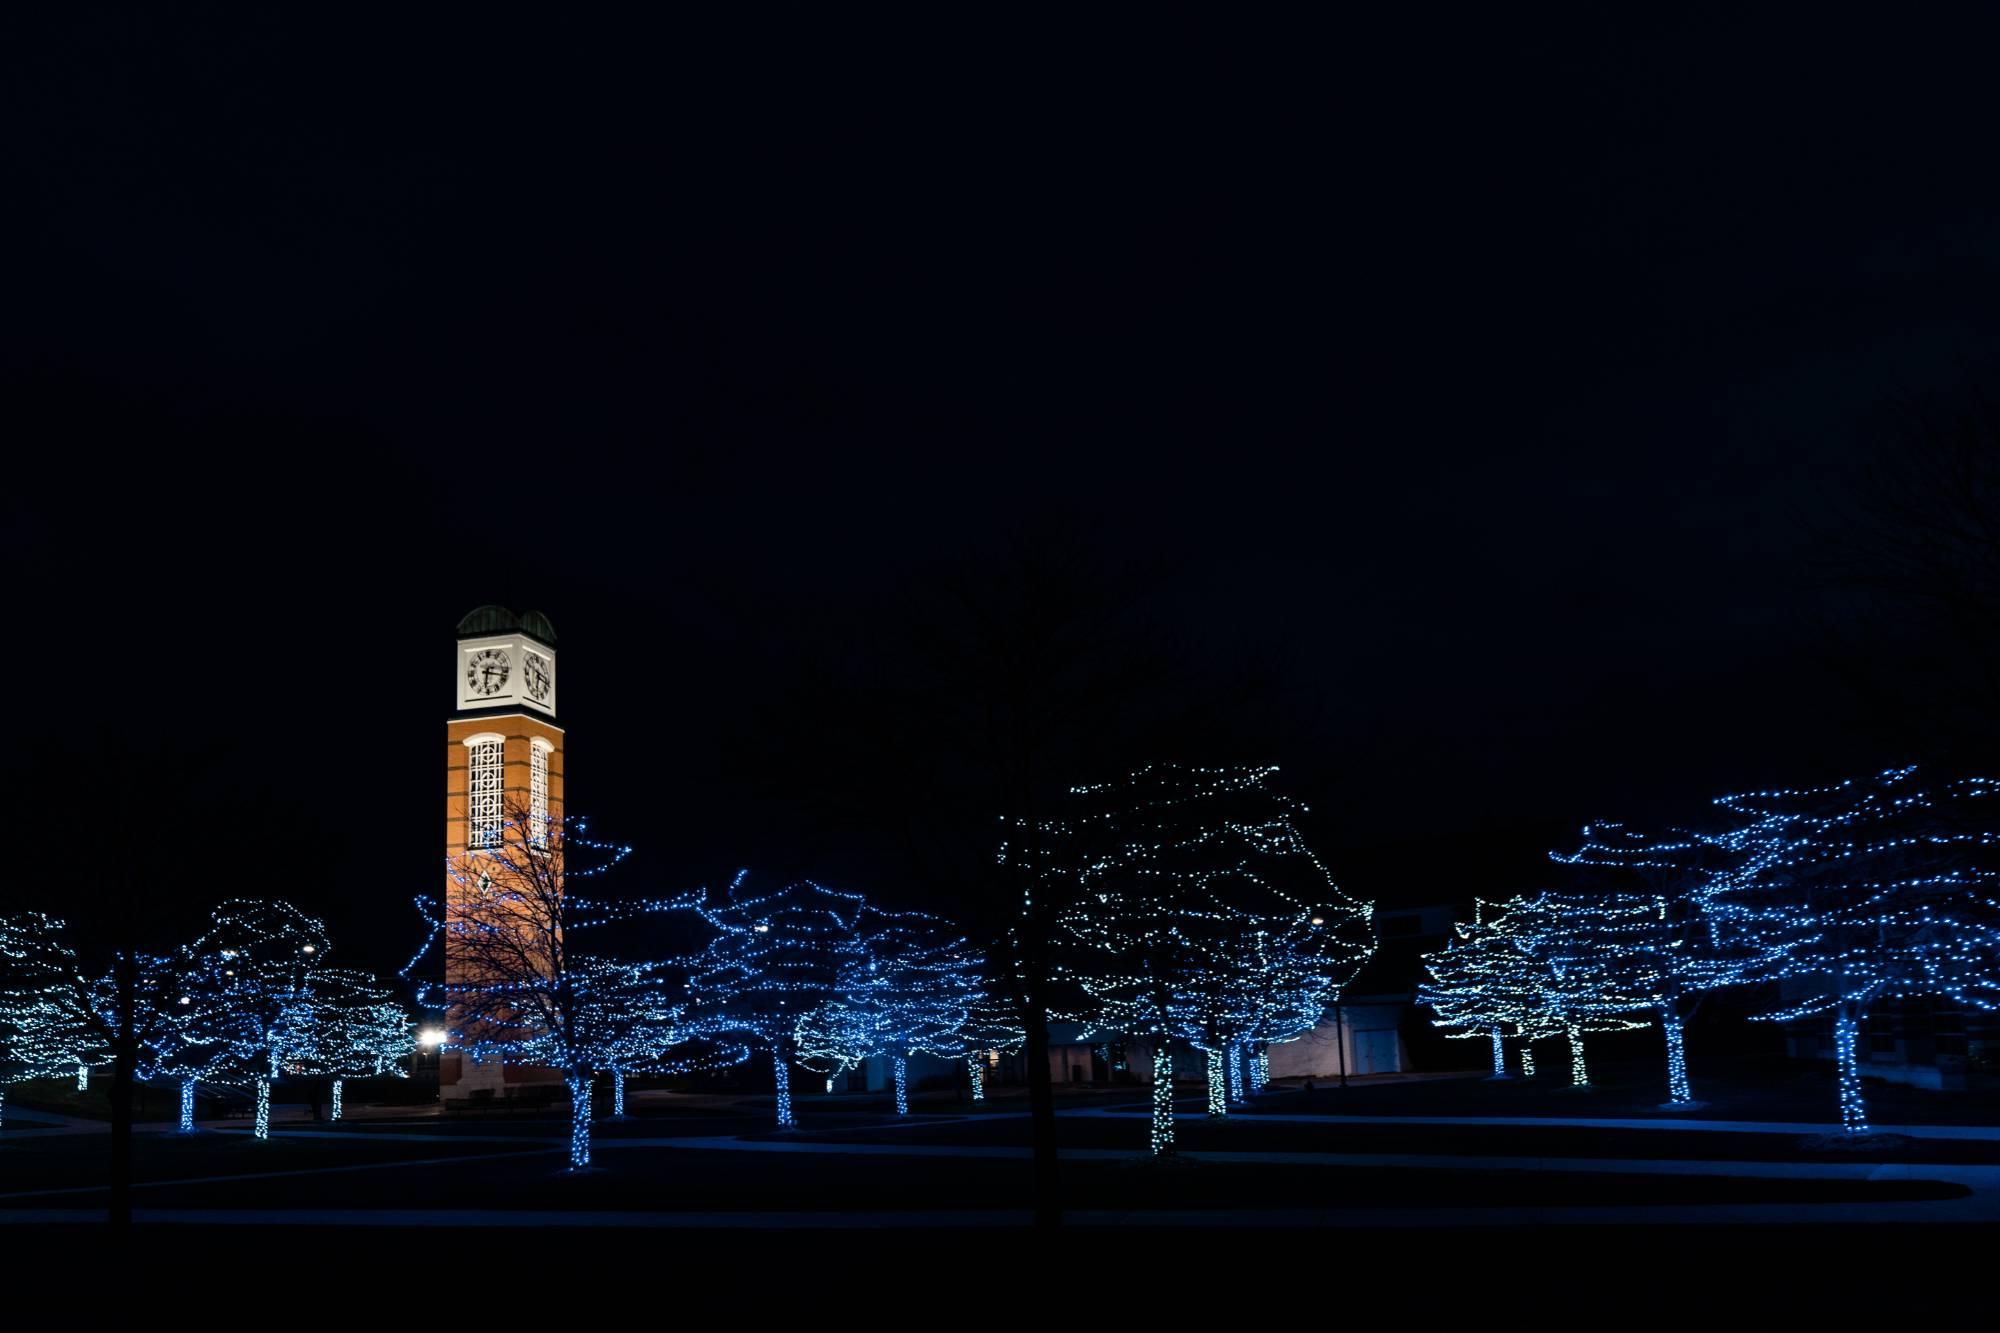 The Cook Carillon Towe on GVSU's Allendale Campus at night with lights